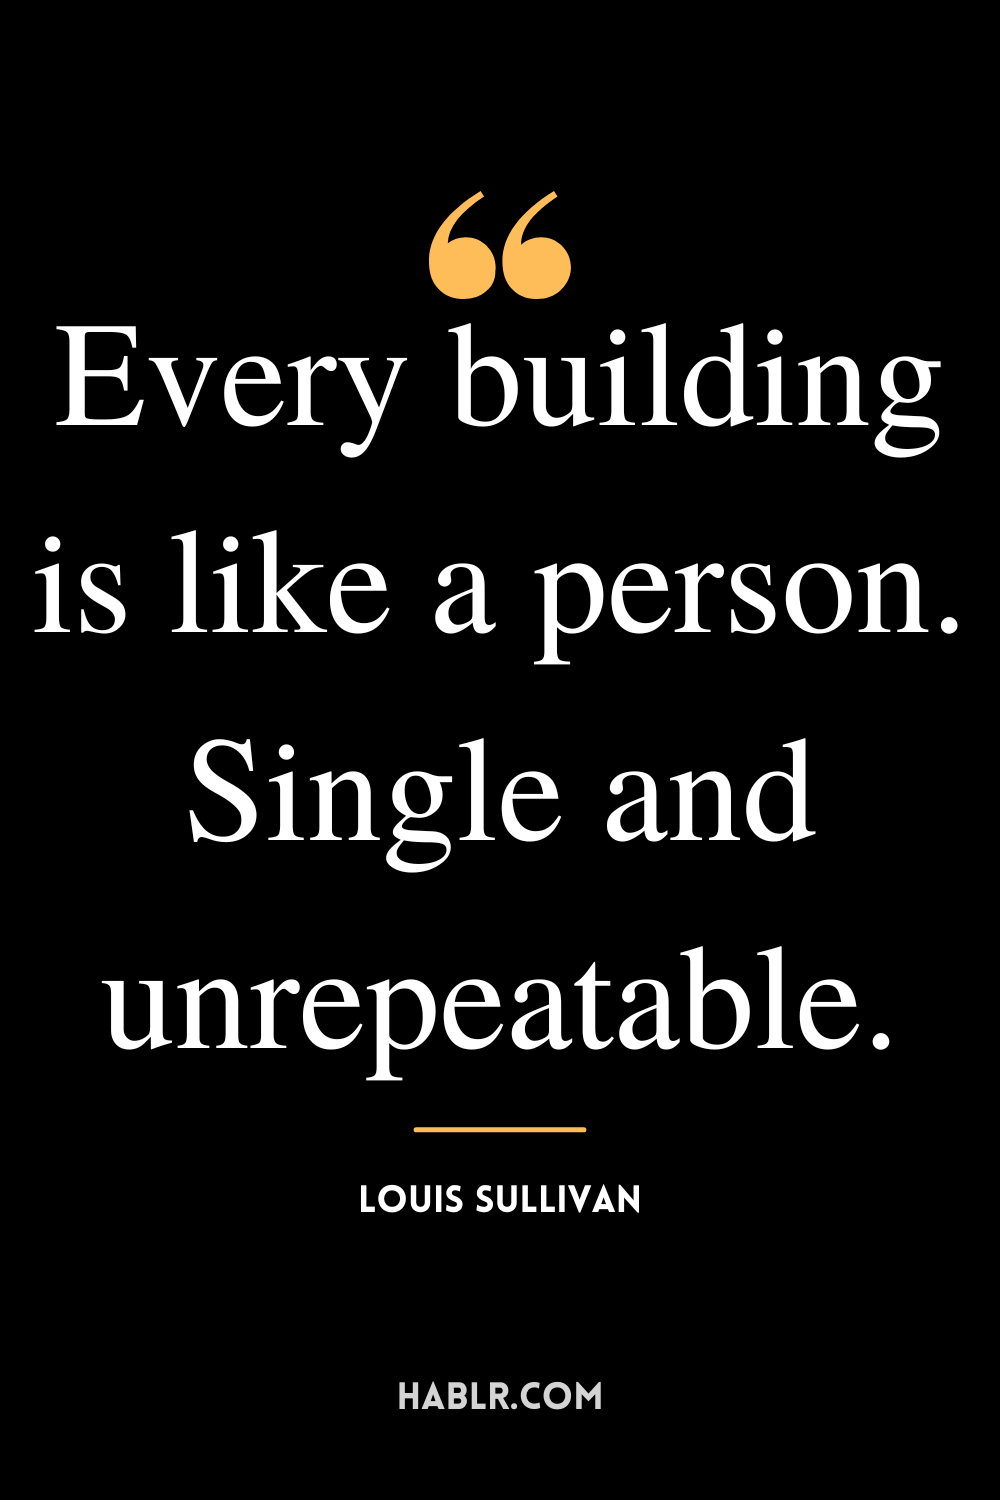 “Every building is like a person. Single and unrepeatable.” -Louis Sullivan